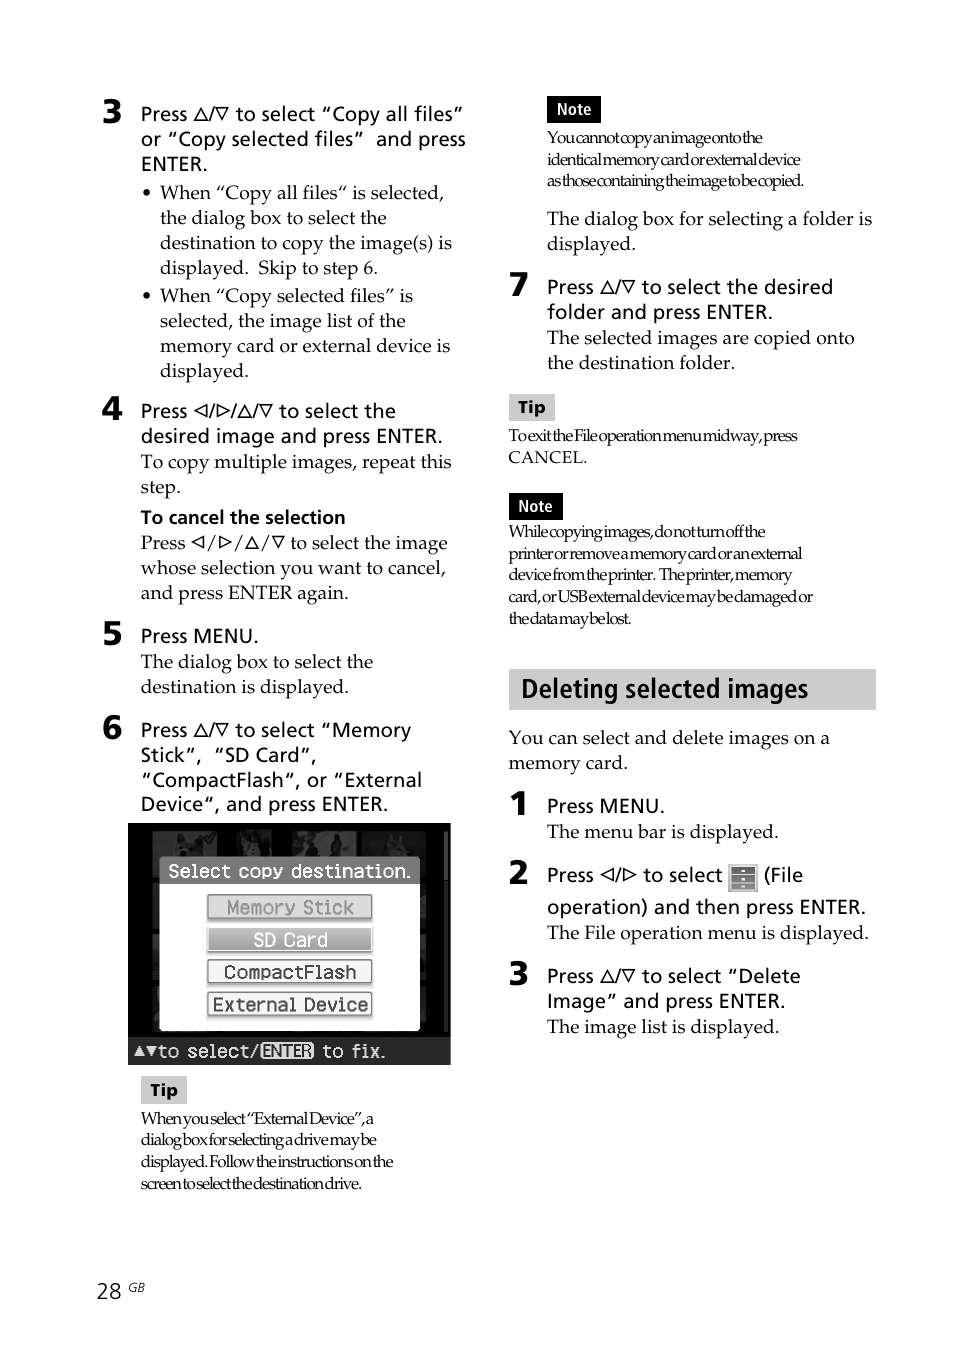 Deleting selected images | Sony DPP-FP70 User Manual | Page 28 / 84